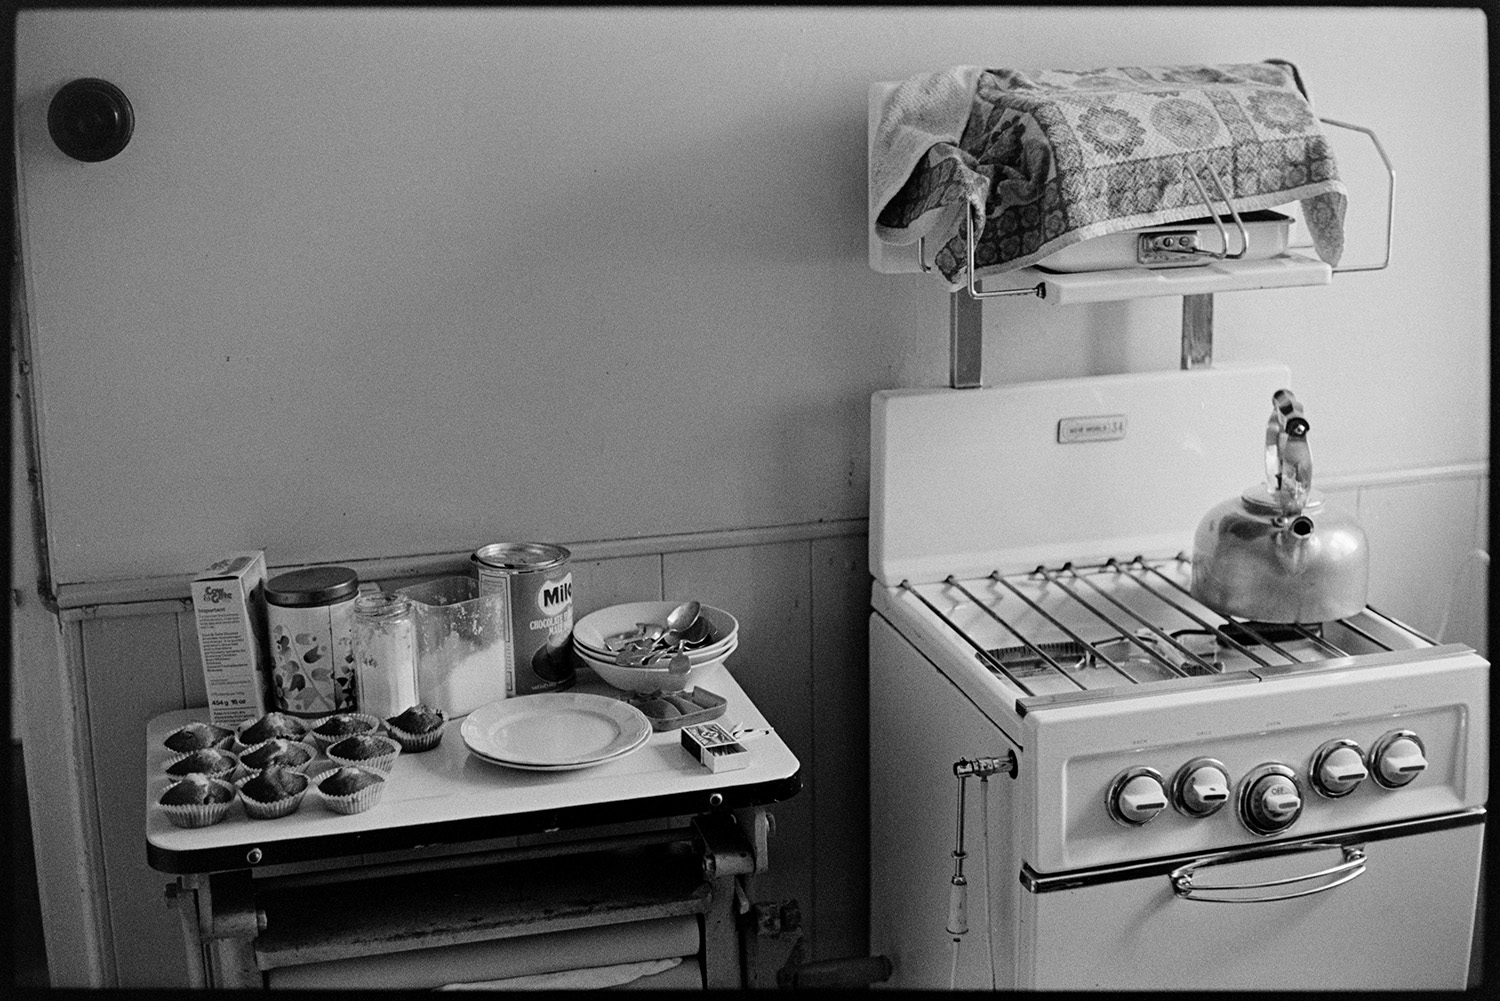 Gas cooker, kettle with buns on sideboard. 
[A kettle on a gas cooker in a house, possible Emily Easterbrook's, in West Lane, Dolton. A side table with plates, bowls, spoons and cakes is next to the cooker.]